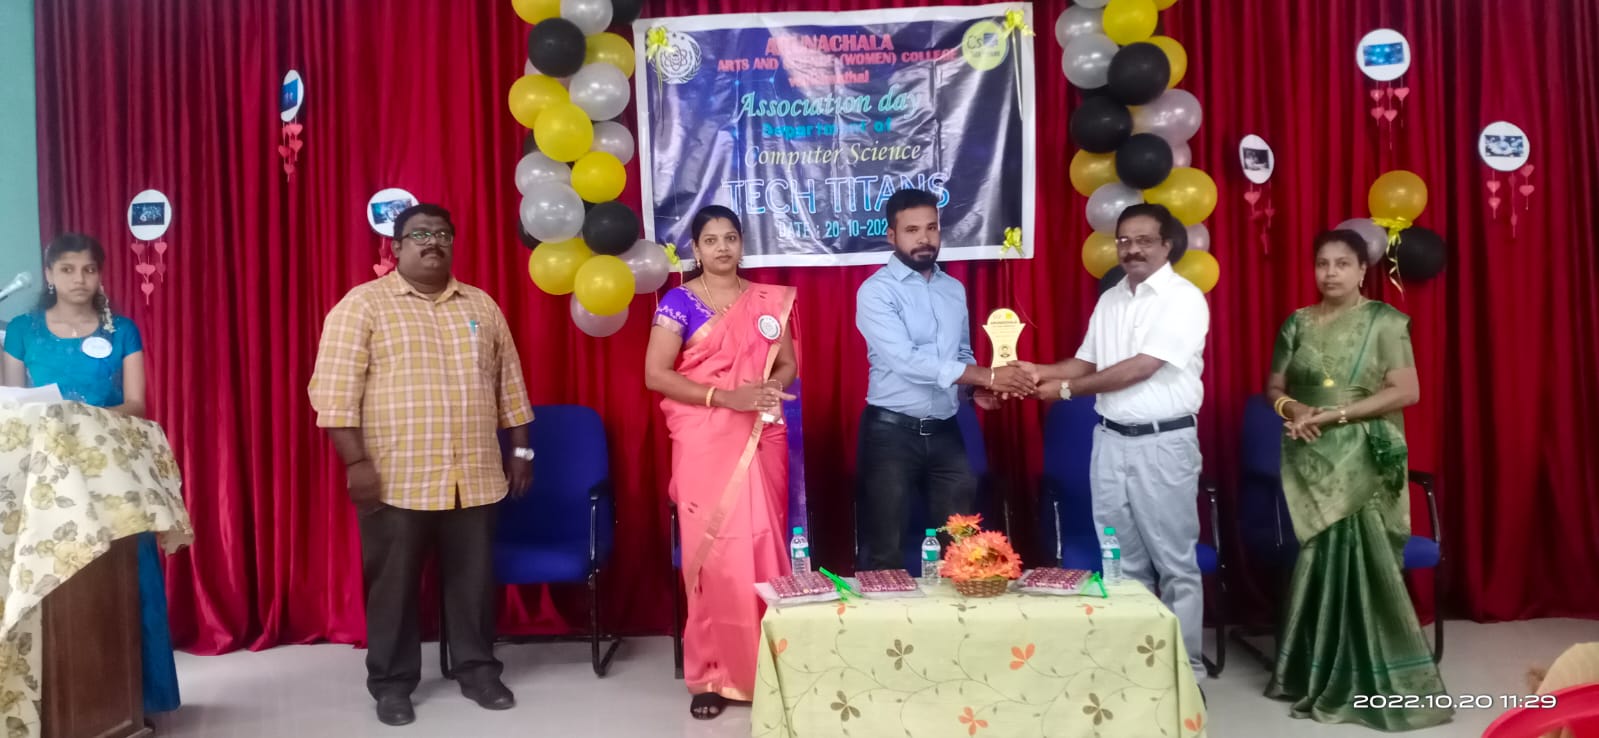 Association Day Department of Computer Science